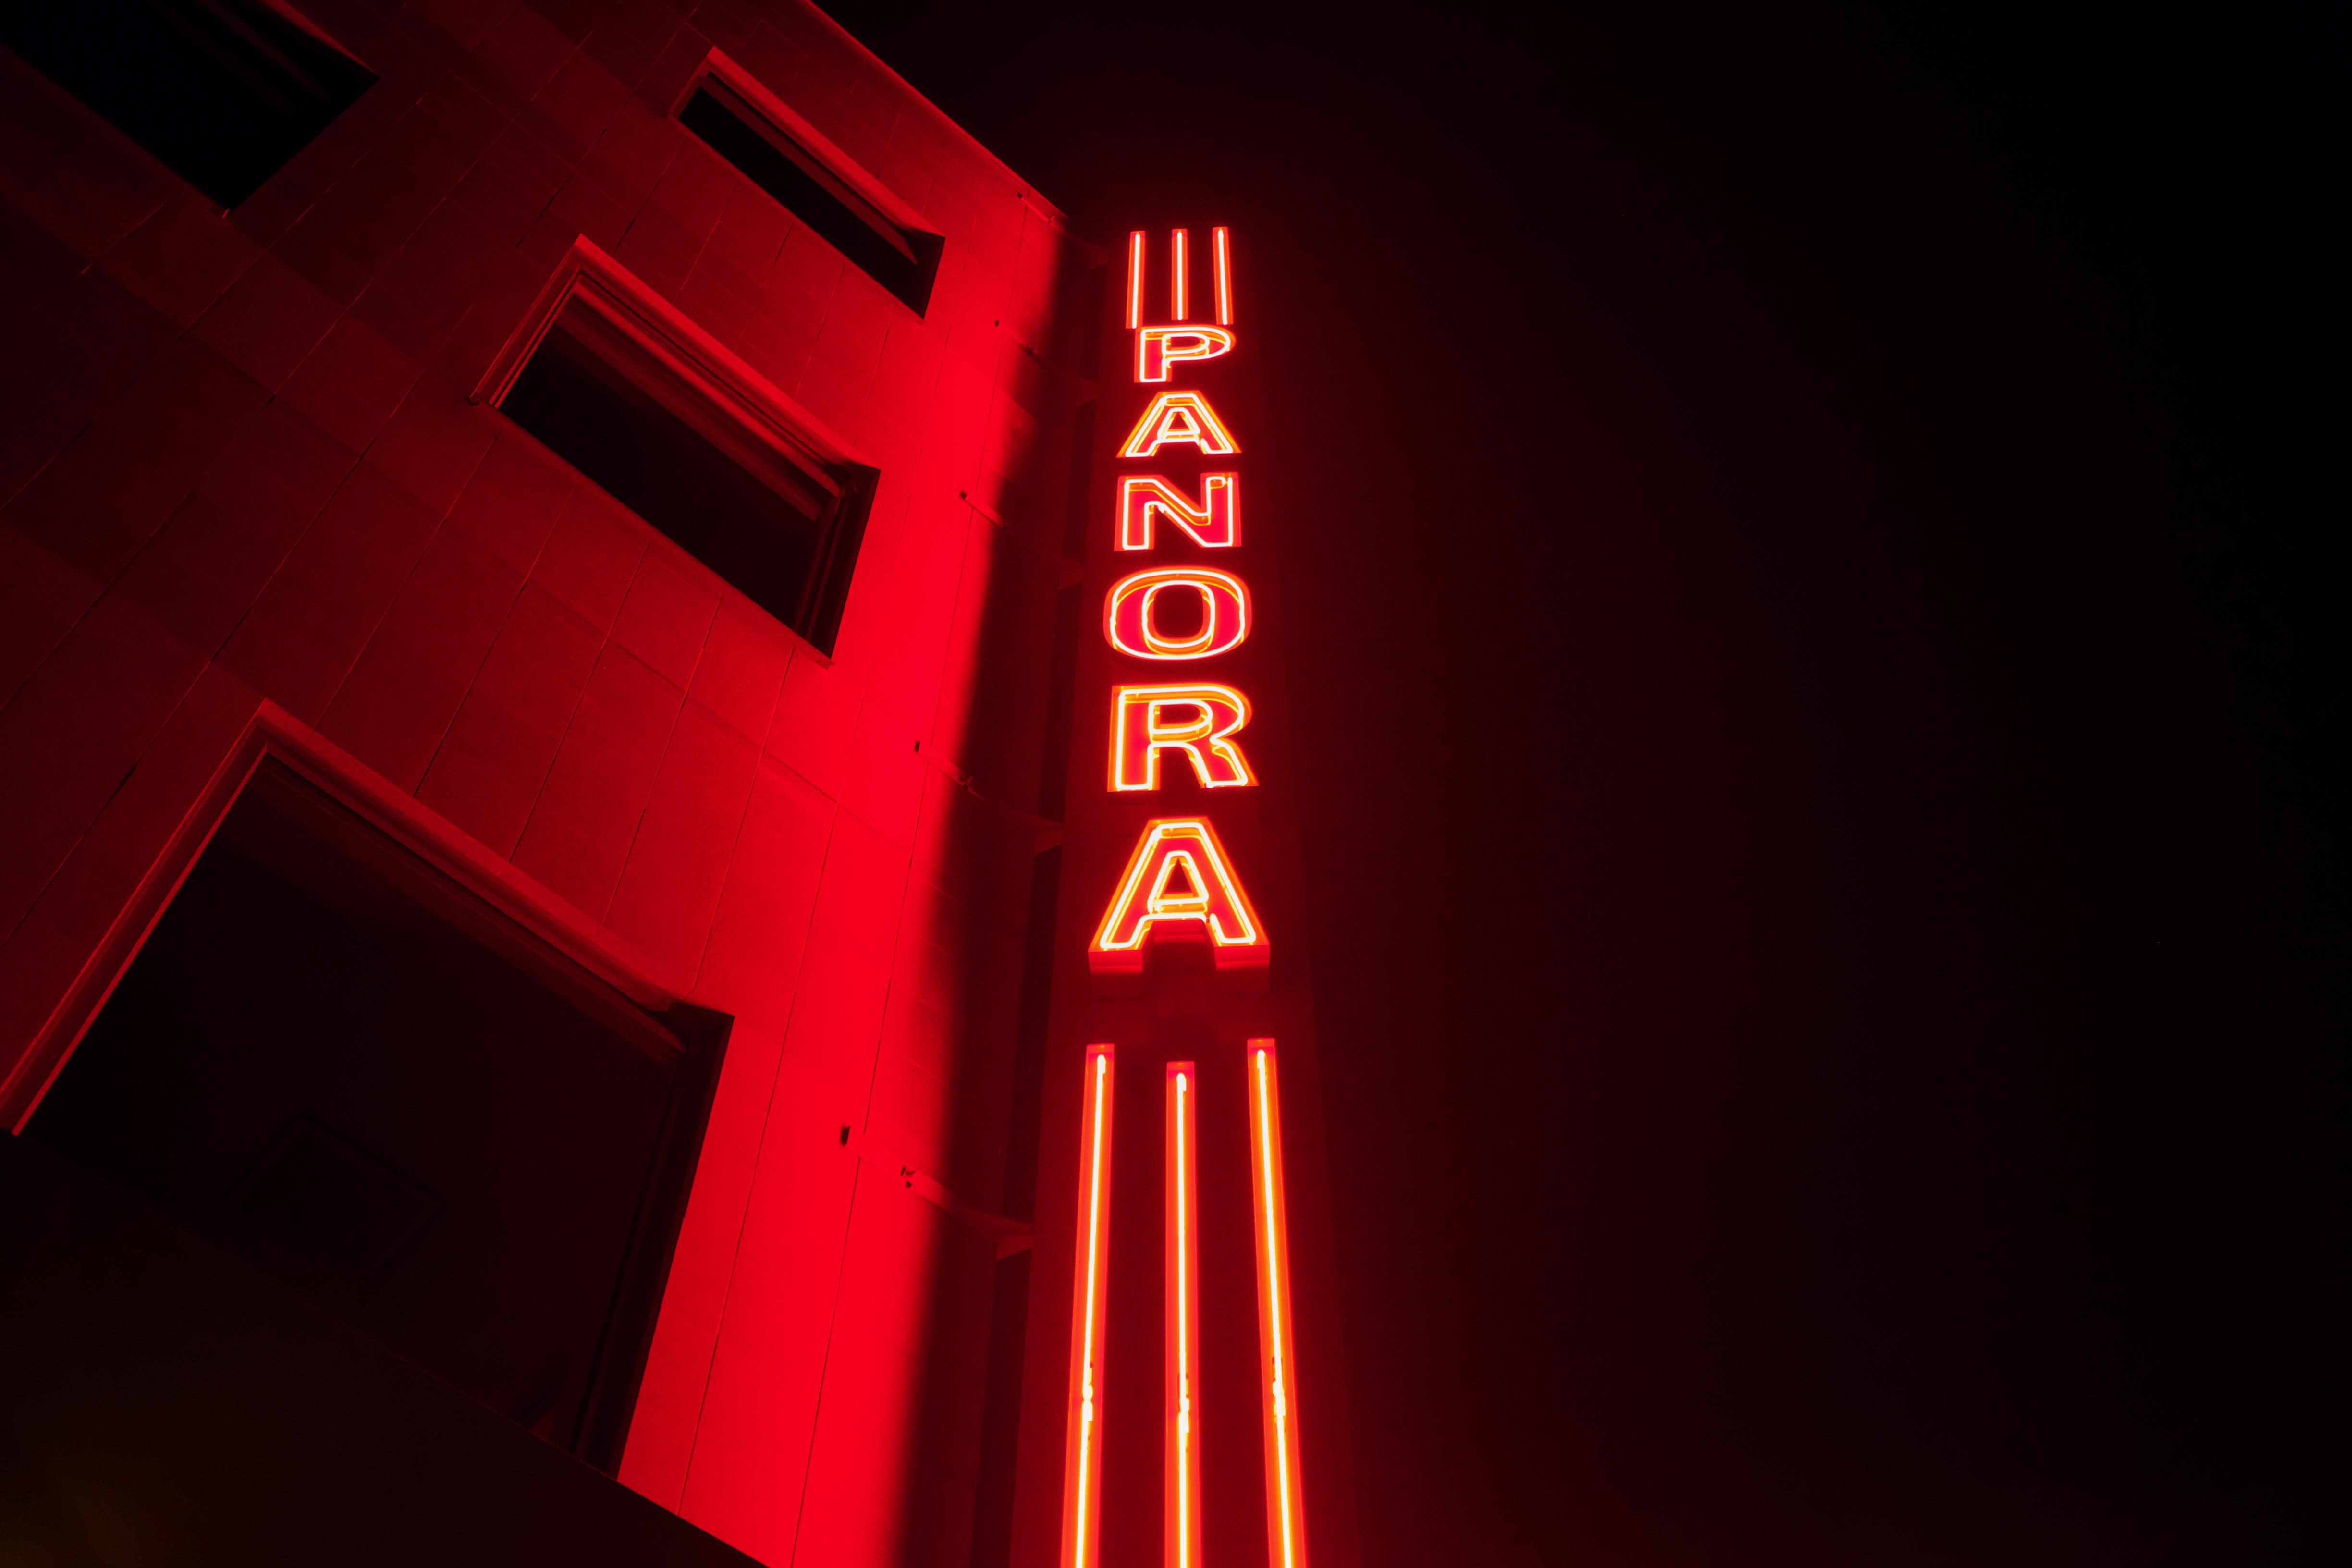 A red neon sign that is on the side of building - Light red